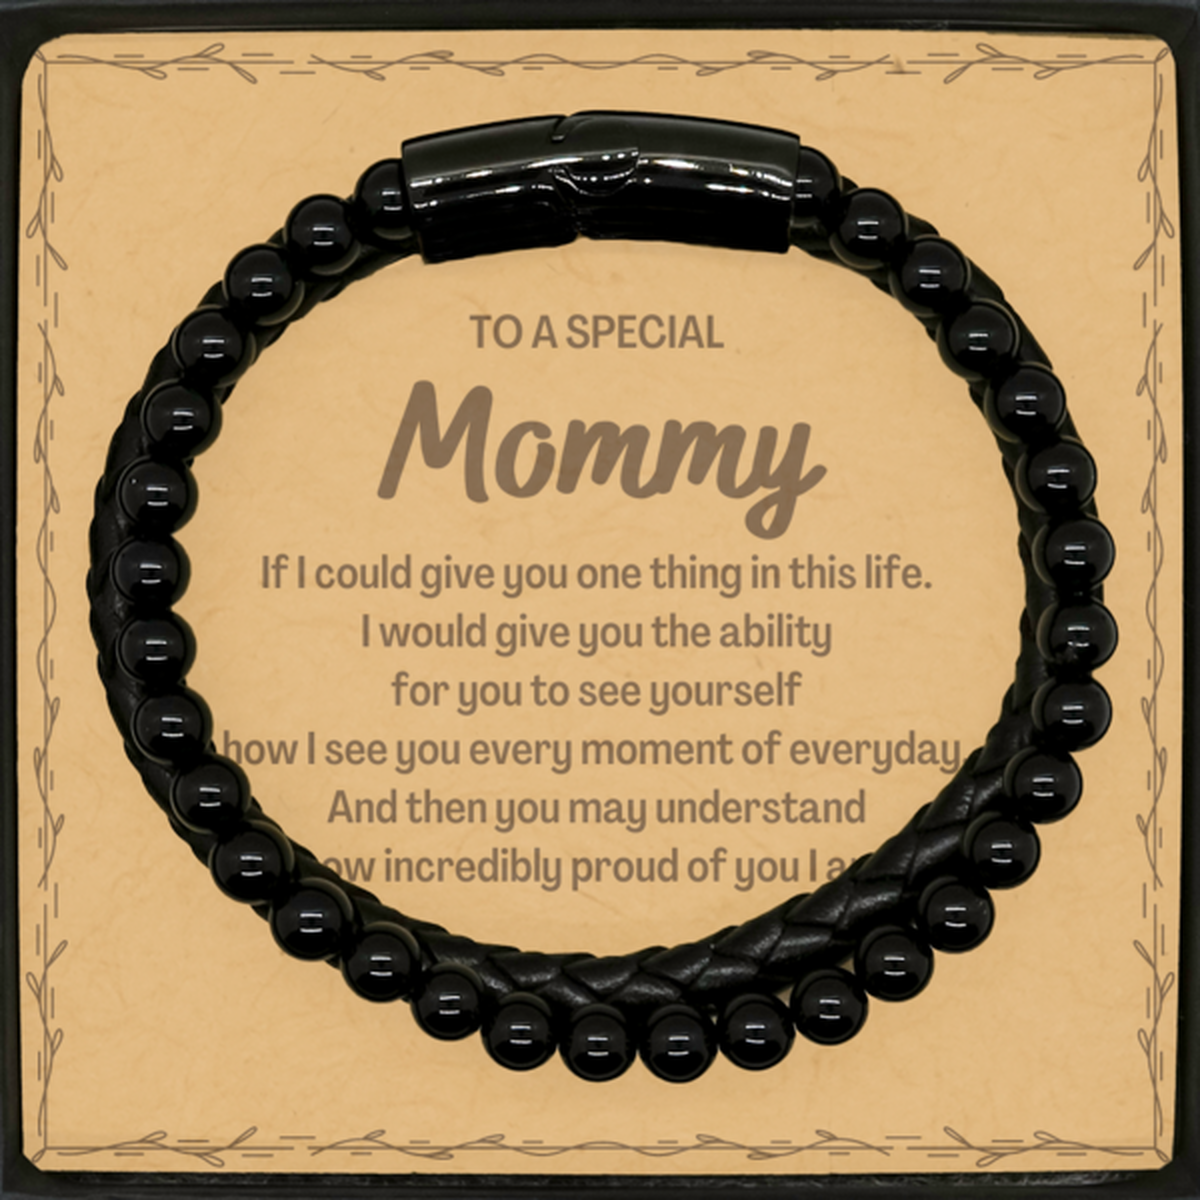 To My Mommy Stone Leather Bracelets, Gifts For Mommy Message Card, Inspirational Gifts for Christmas Birthday, Epic Gifts for Mommy To A Special Mommy how incredibly proud of you I am